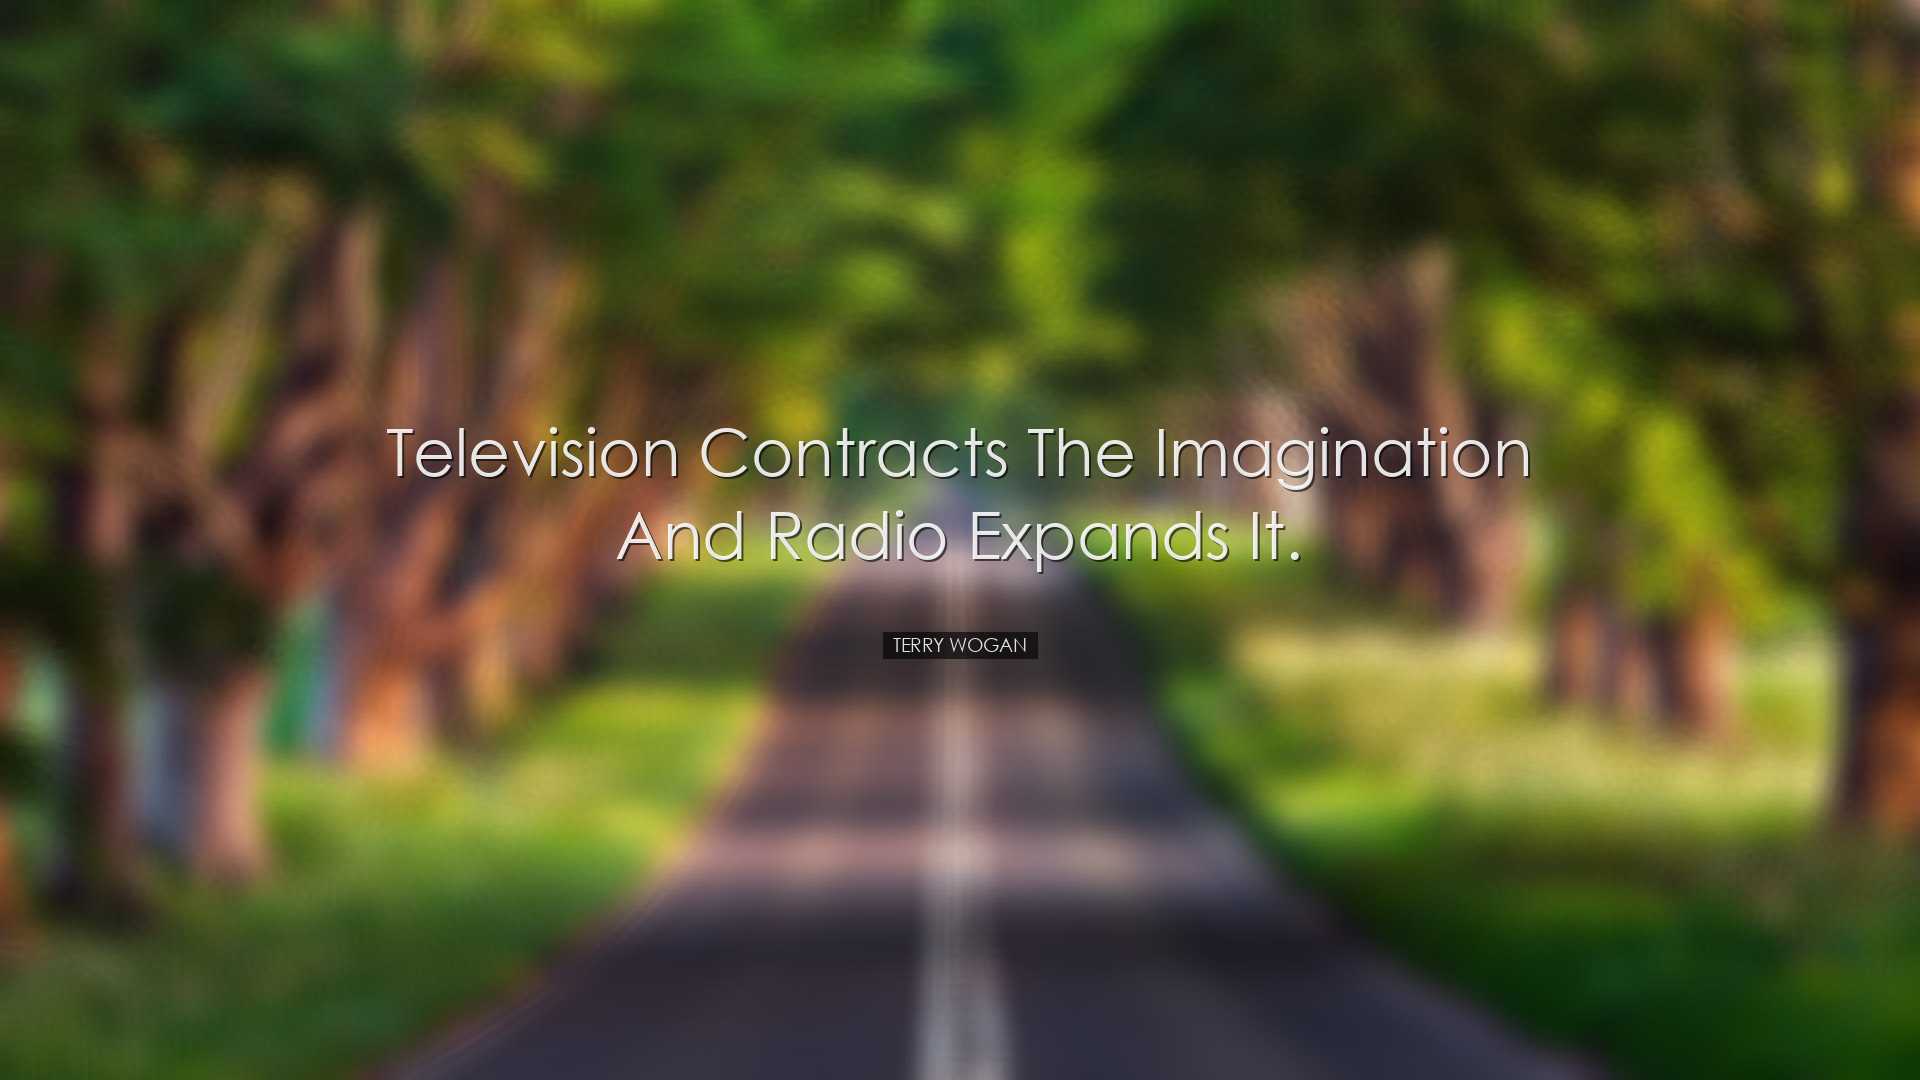 Television contracts the imagination and radio expands it. - Terry